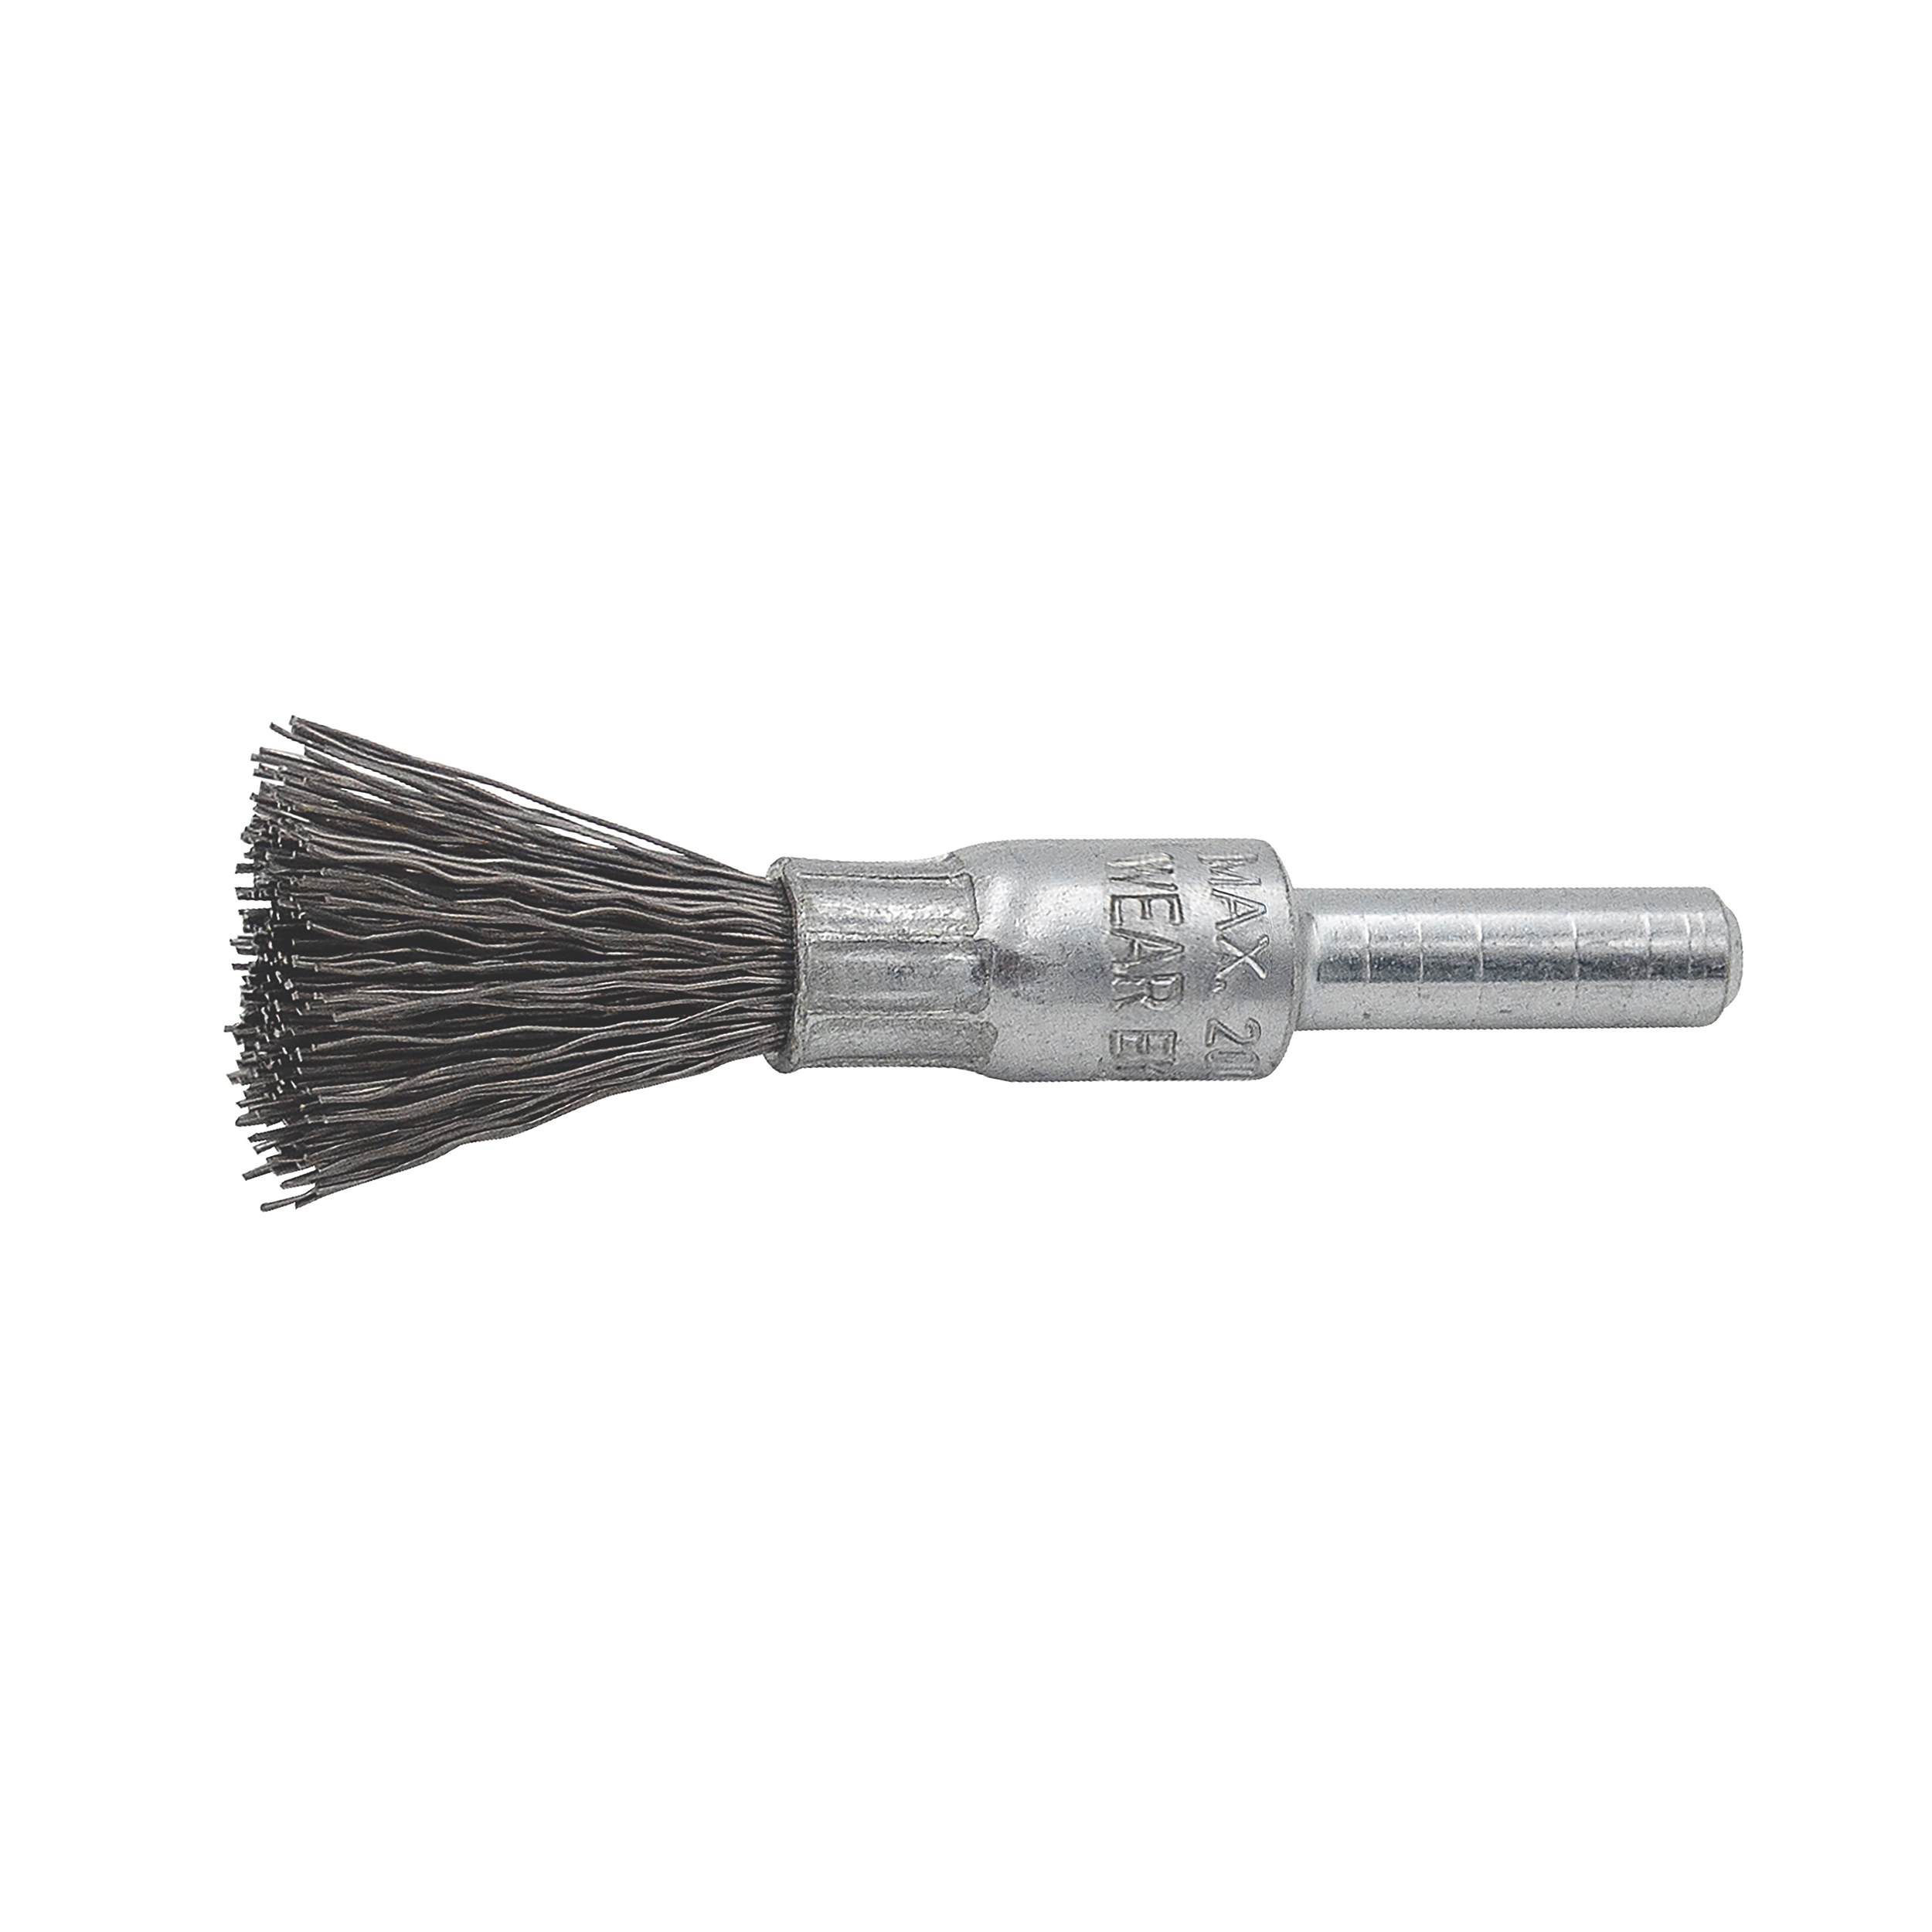 paint brushes Ø 12mm until max. 20.000 UPM, steel wire Ø 0,30mm, length: 60mm